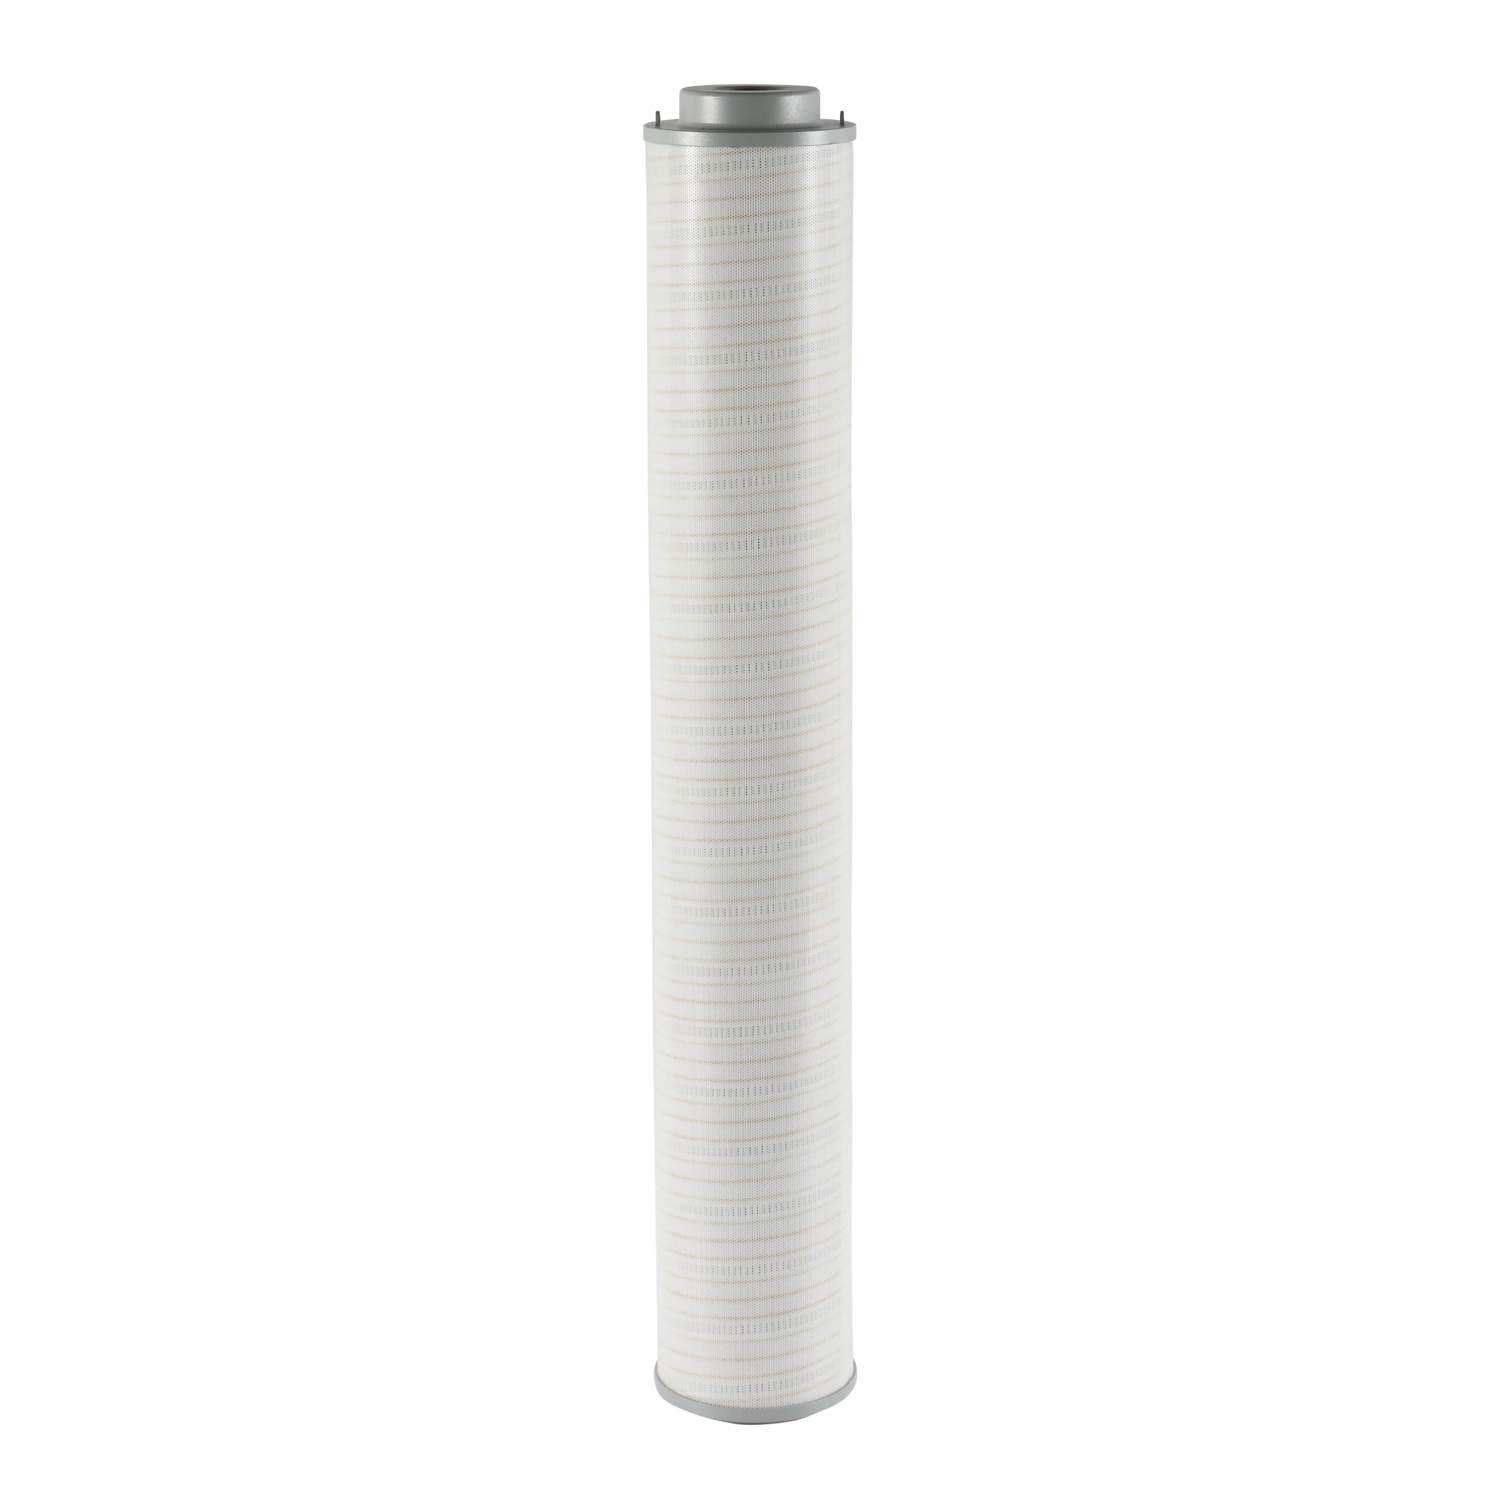 replacement Pall/Hydac/Donaldson centrifugal inline oil filter element for turbine and compressor